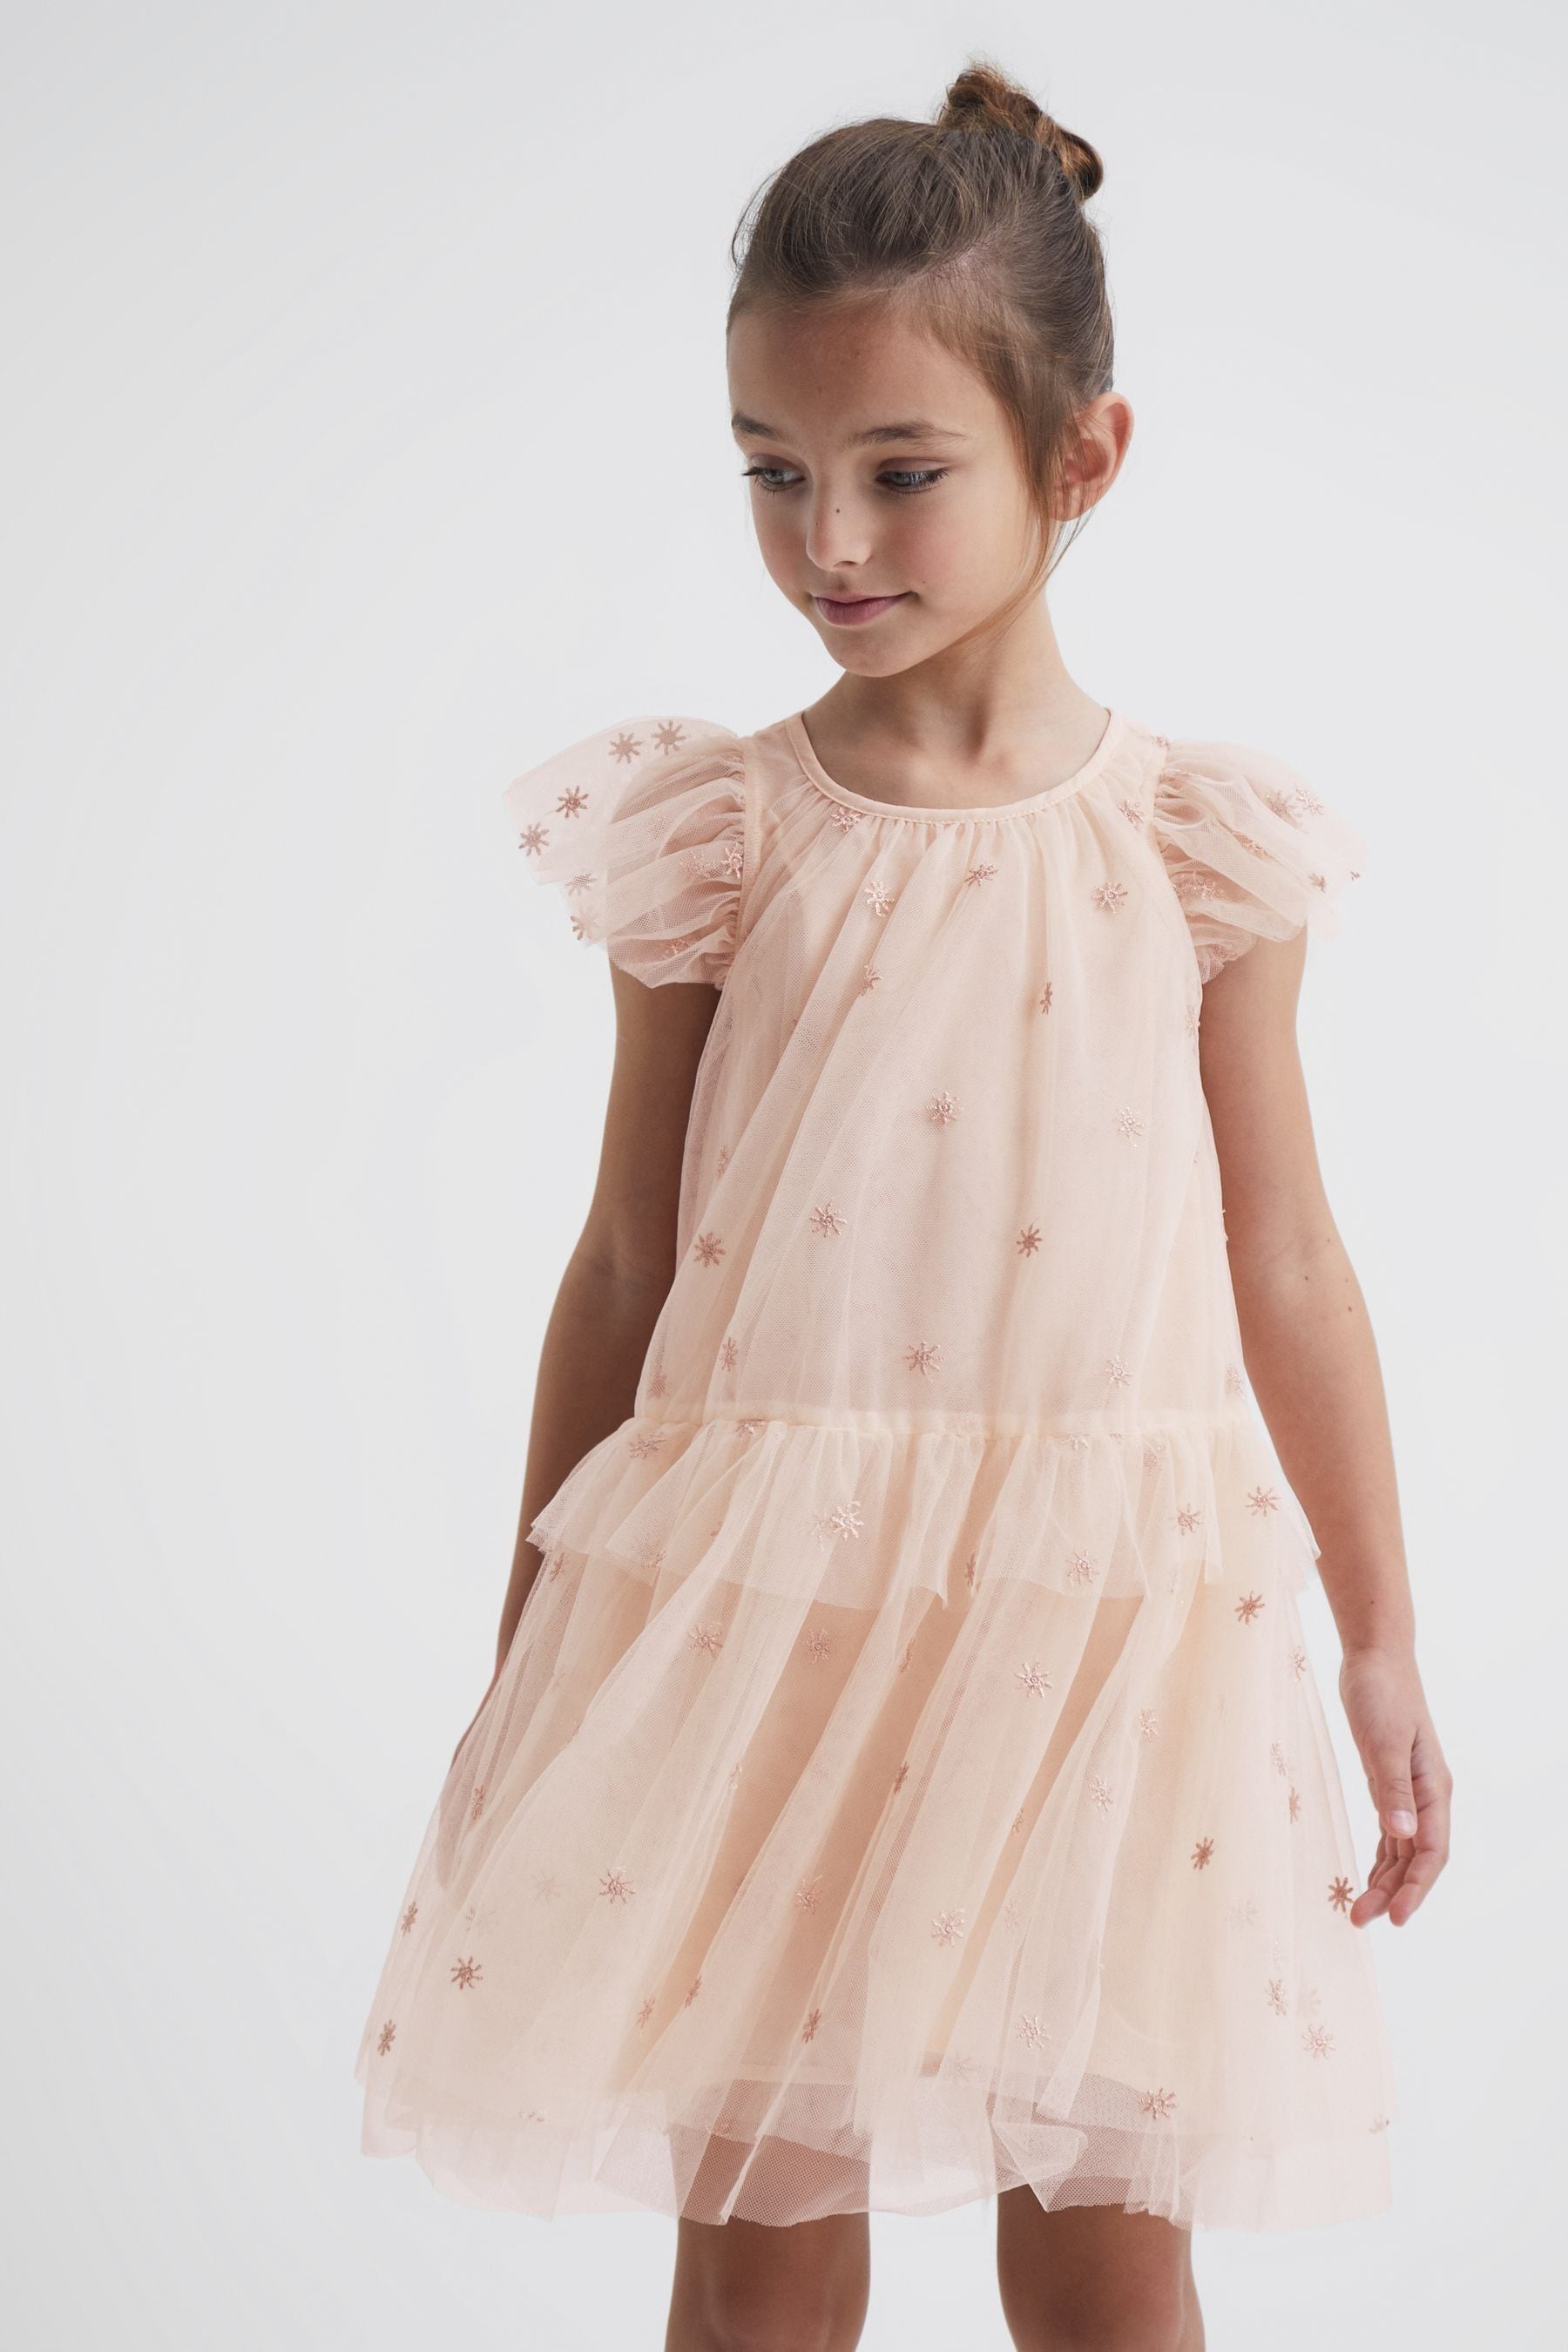 Reiss Kids' Fifi - Pale Pink Senior Tulle Embroidered Dress, Uk 9-10 Yrs